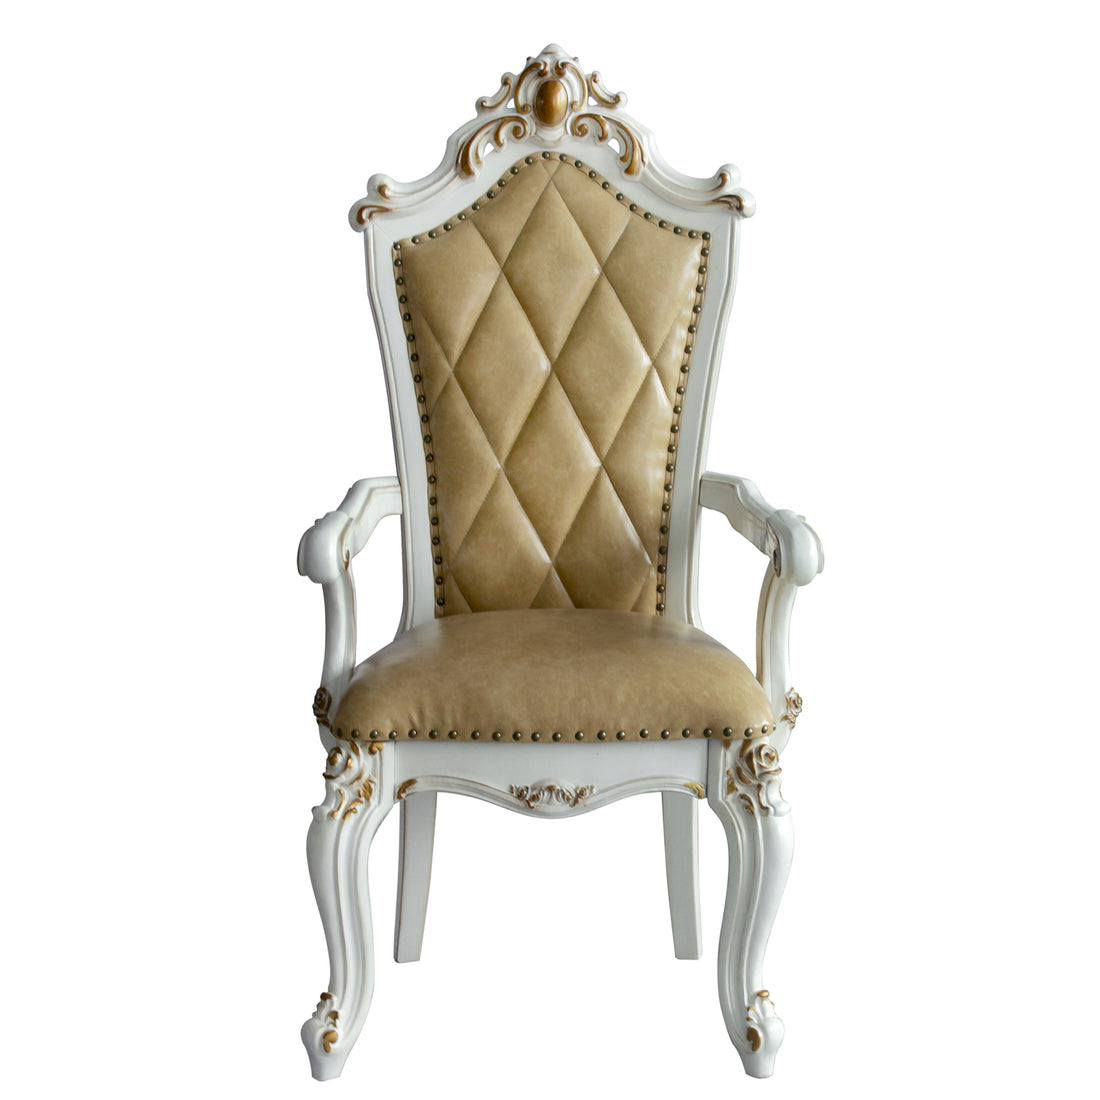 Butterscotch And Antique Pearl Tufted Arm Chairs